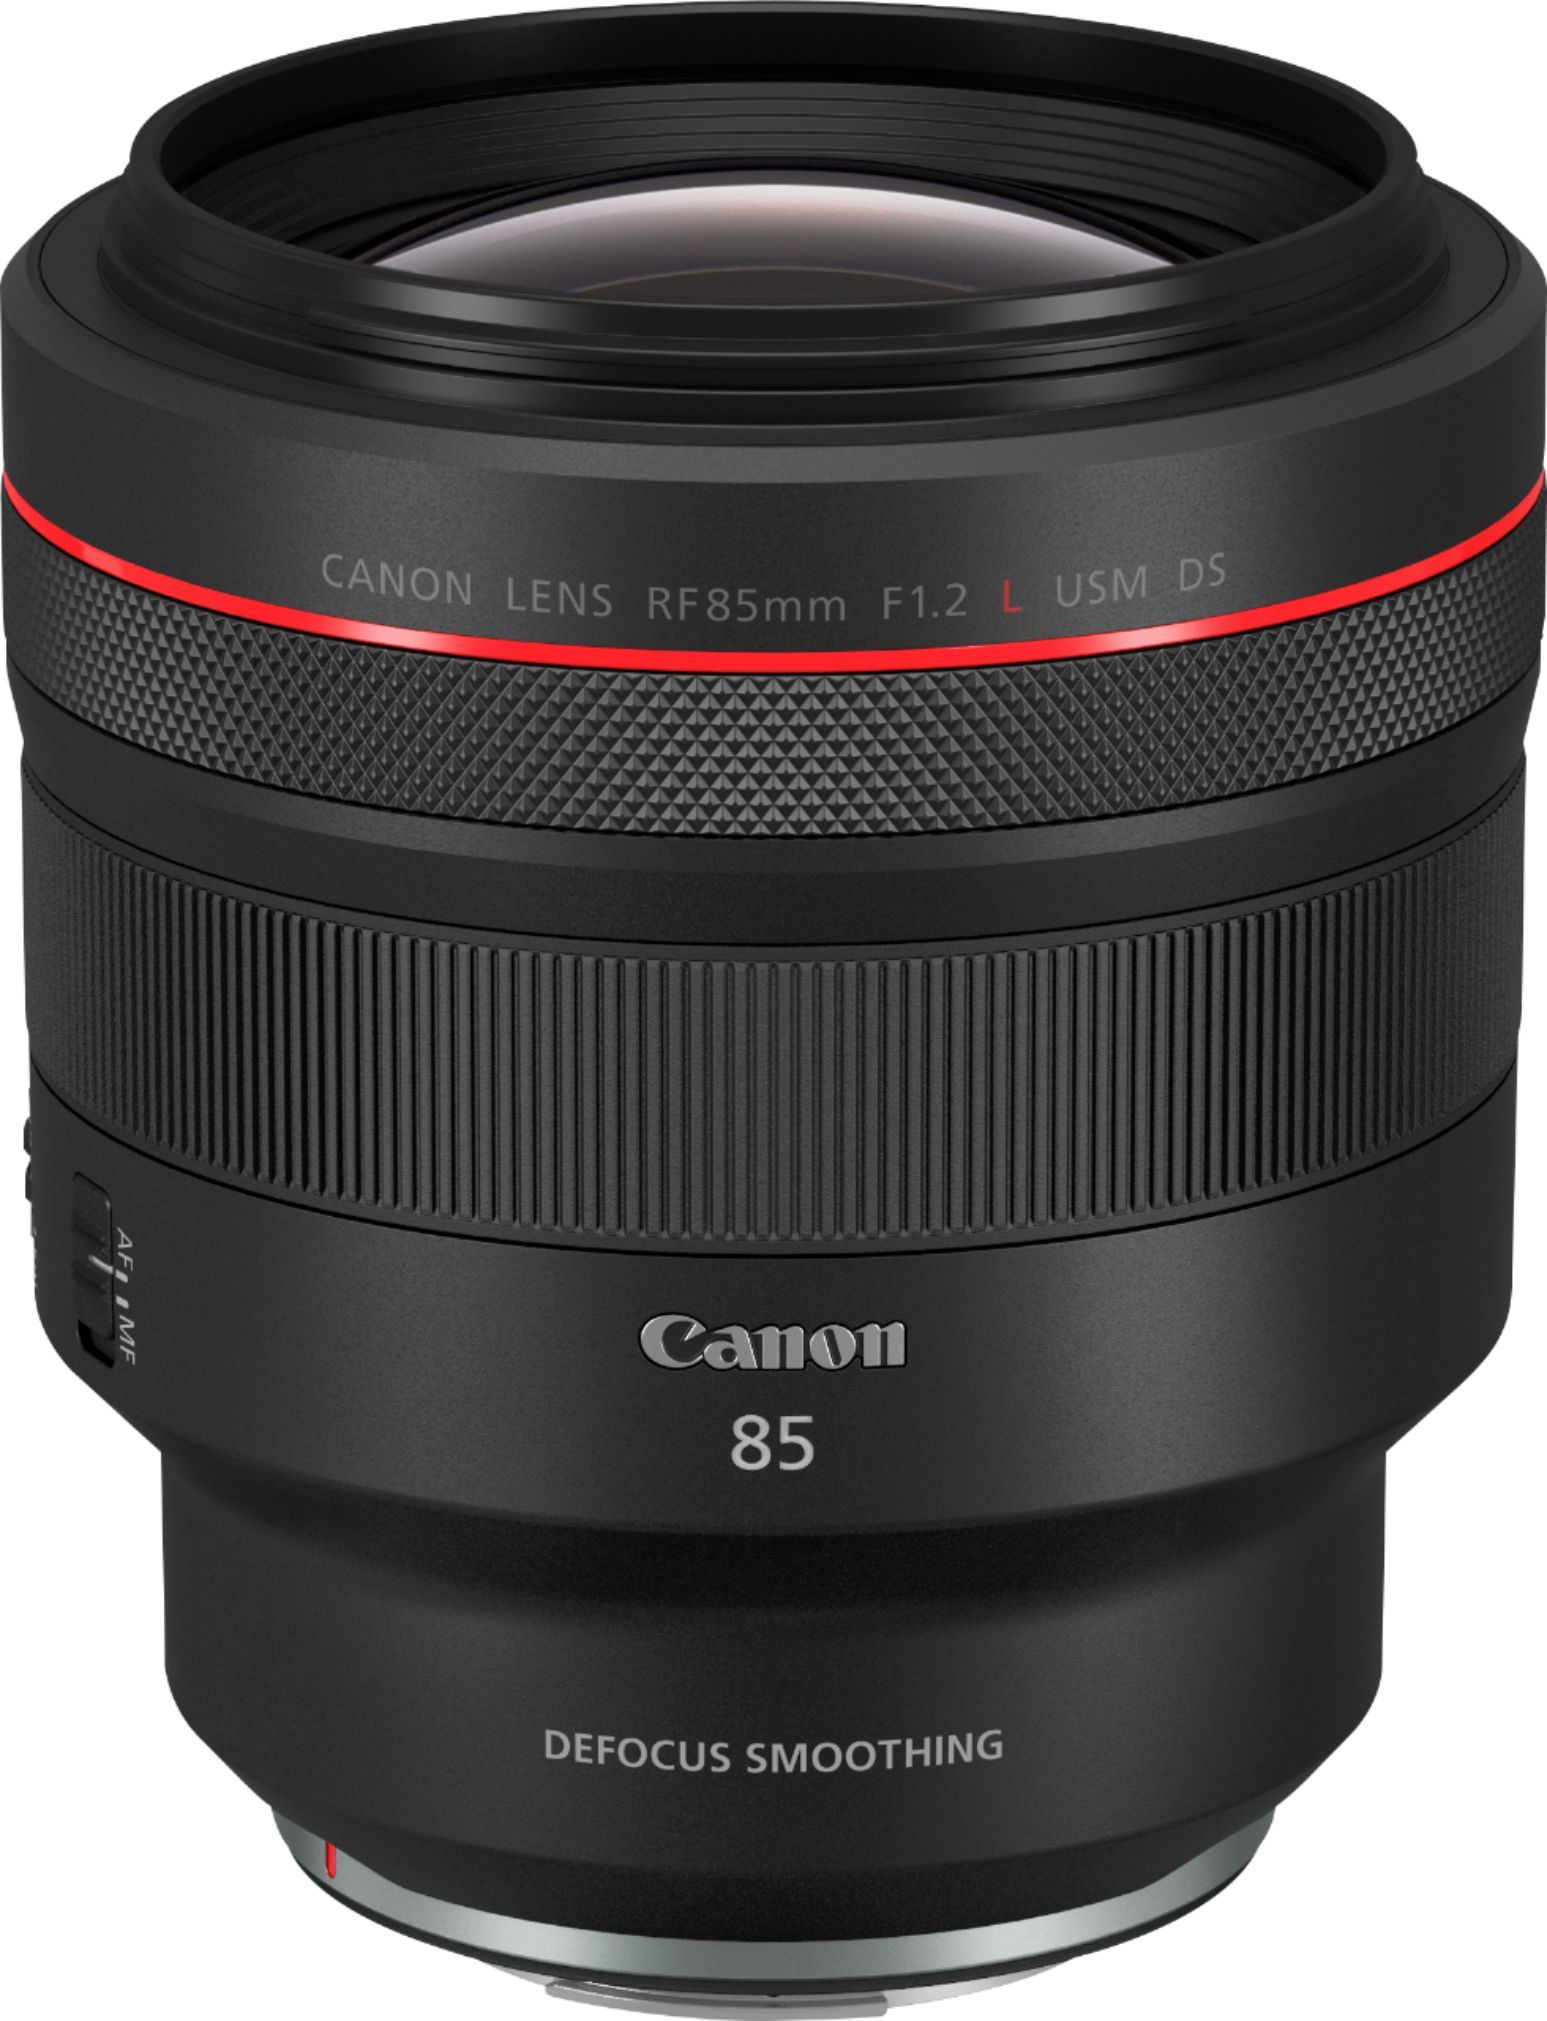 Canon RF 85mm F1.2 L USM DS Mid-Telephoto Prime Lens for EOS R Cameras 3450C002 - Best Buy | Best Buy U.S.